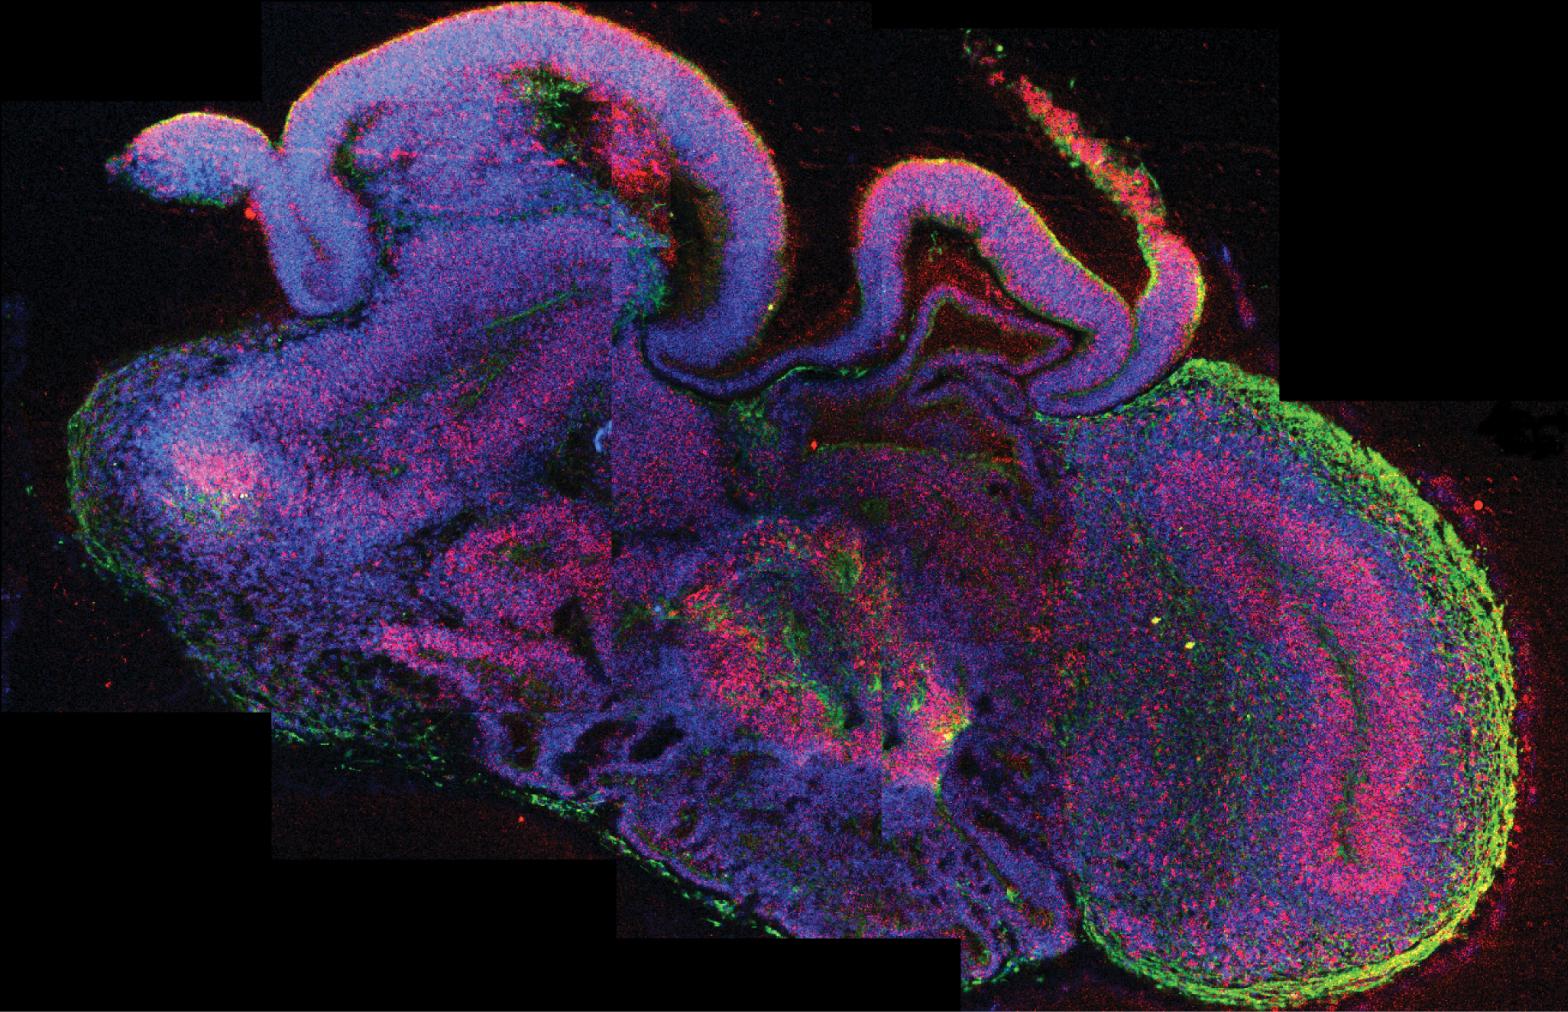 Cover image of Cerebral organoids: an innovative treatment for neurological disorders